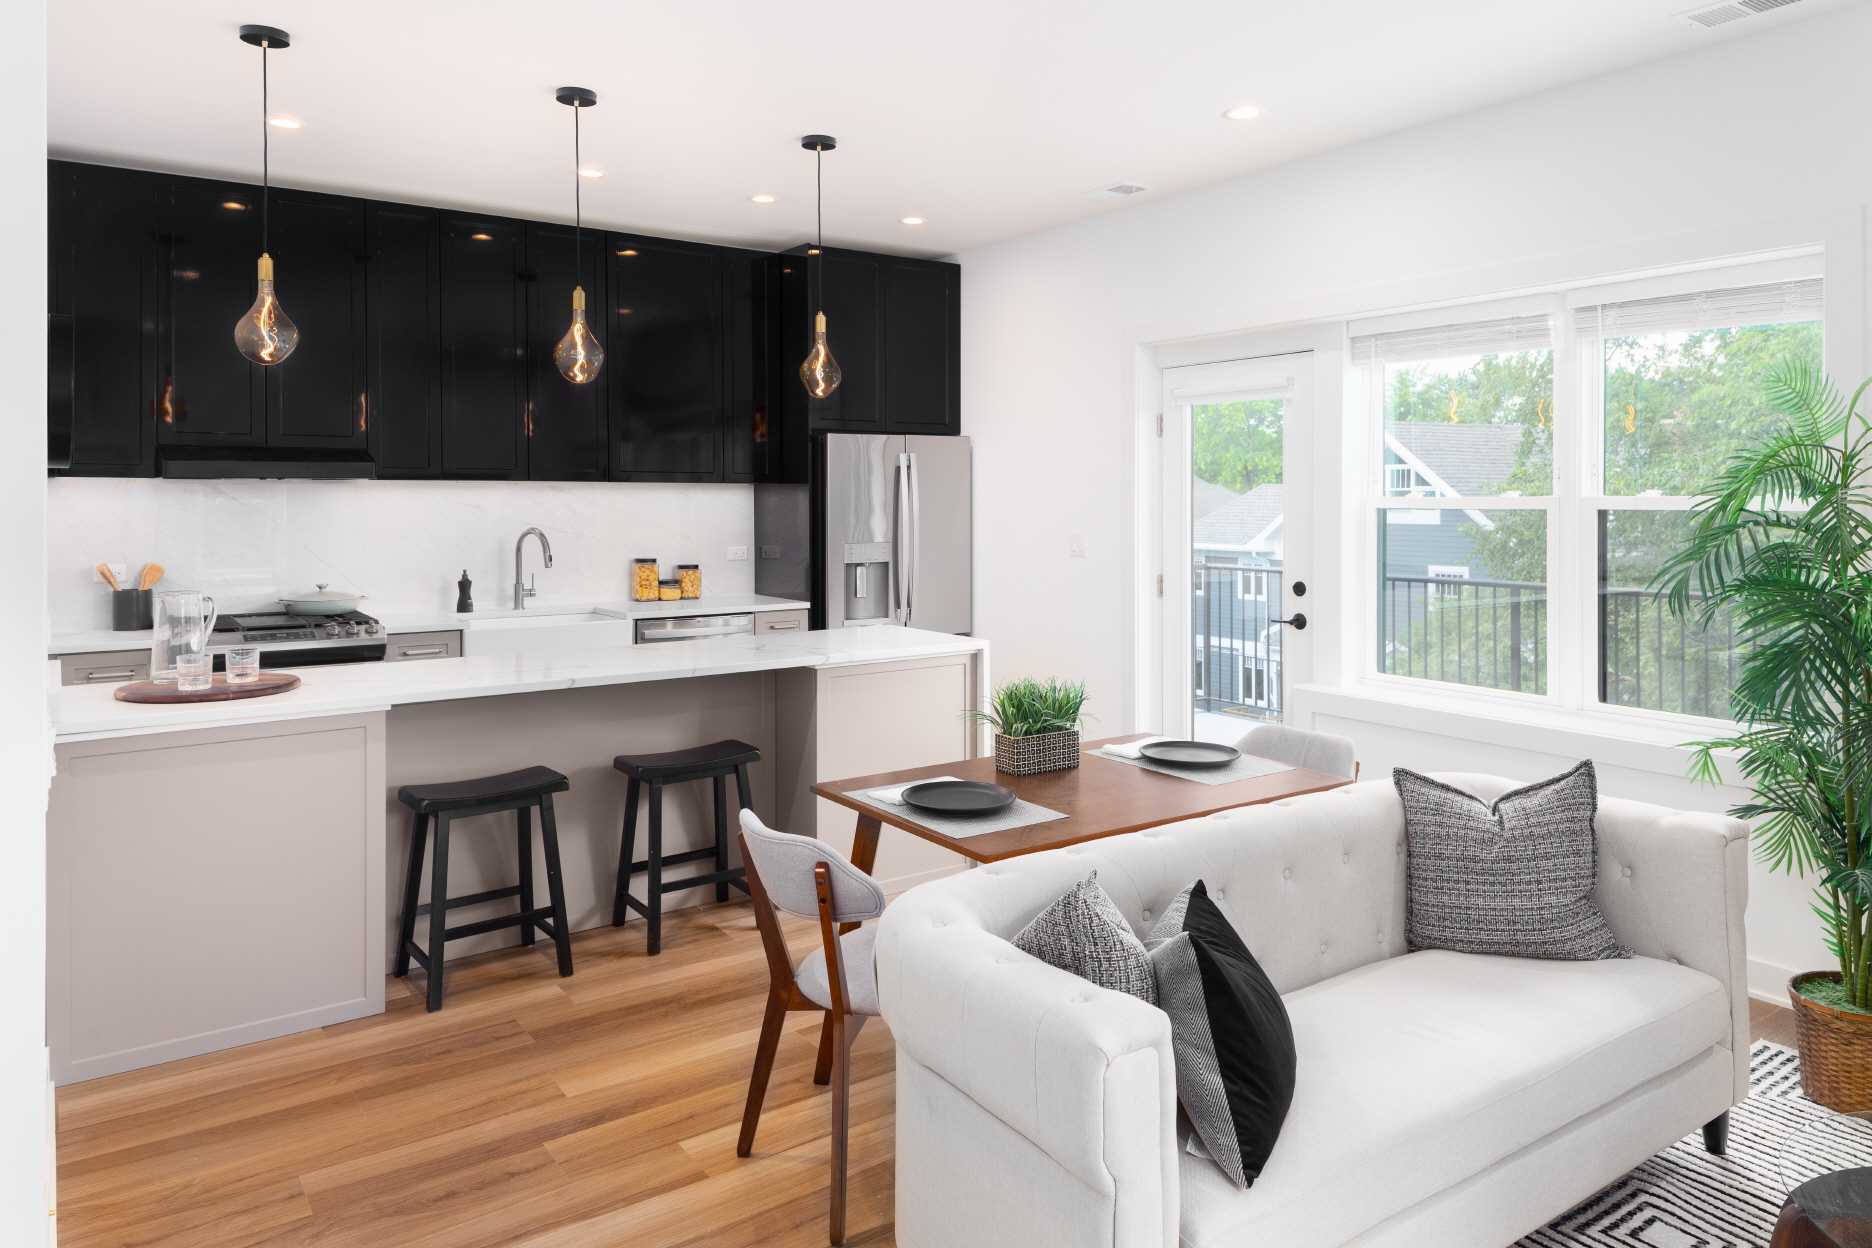 Budget-friendly updates for your living room can create a seamless connection to the kitchen, enhancing style and functionality without overspending.